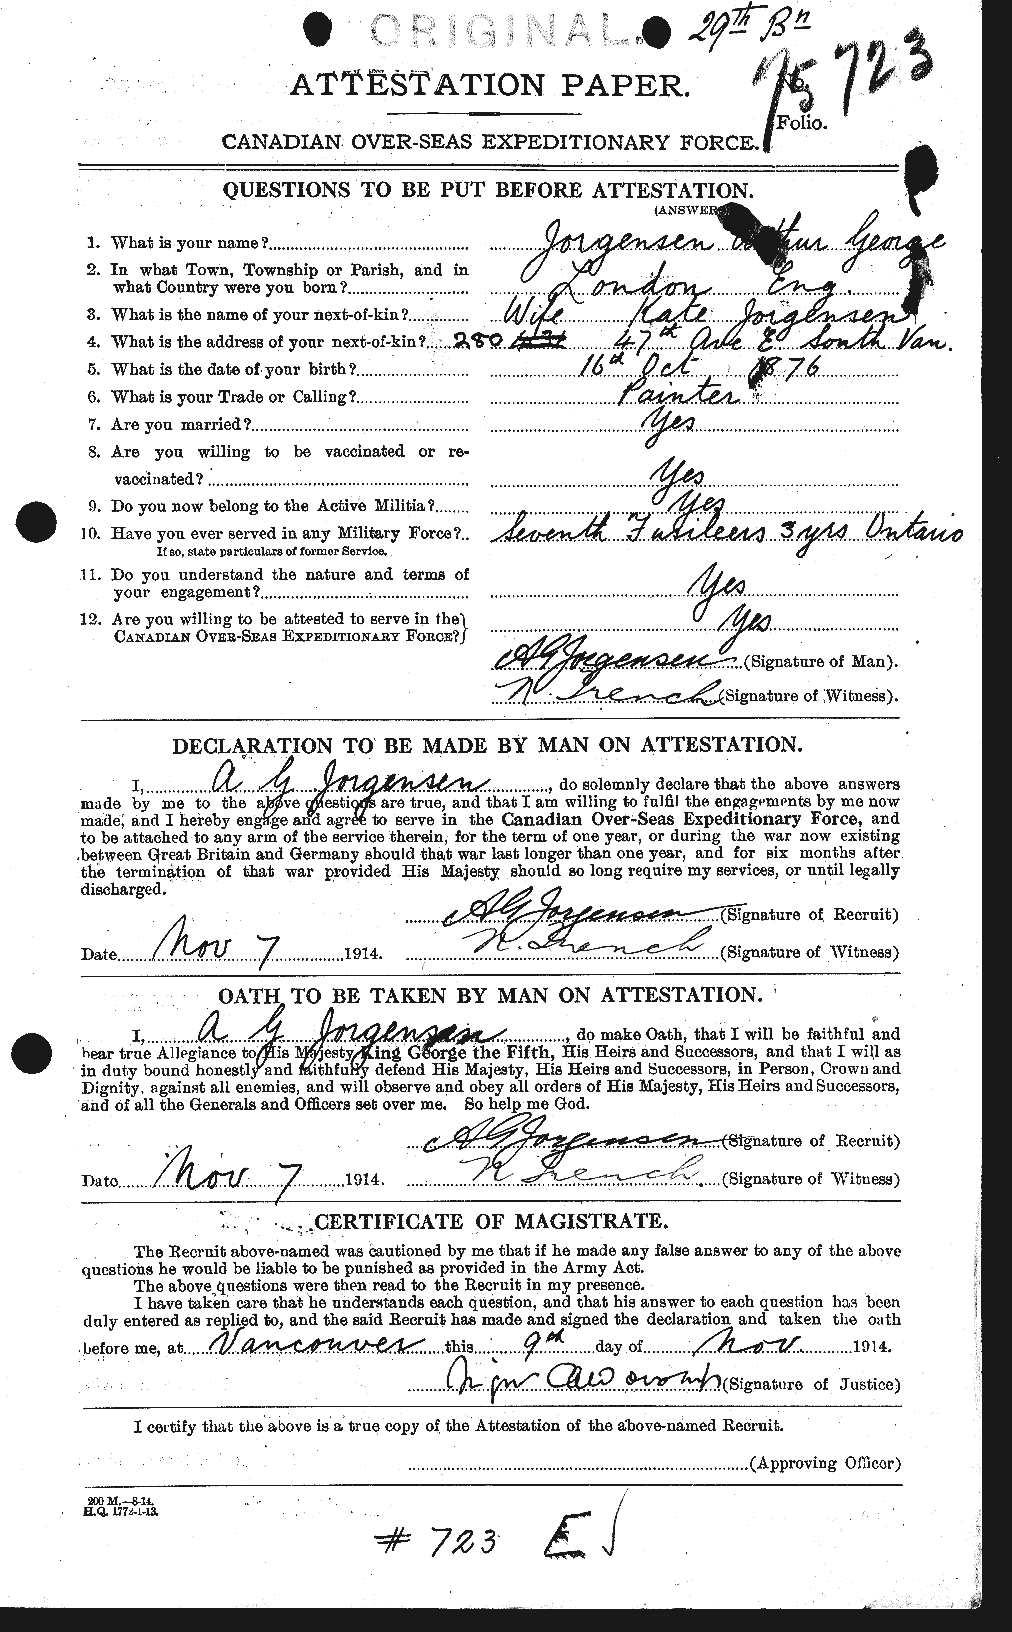 Personnel Records of the First World War - CEF 424531a